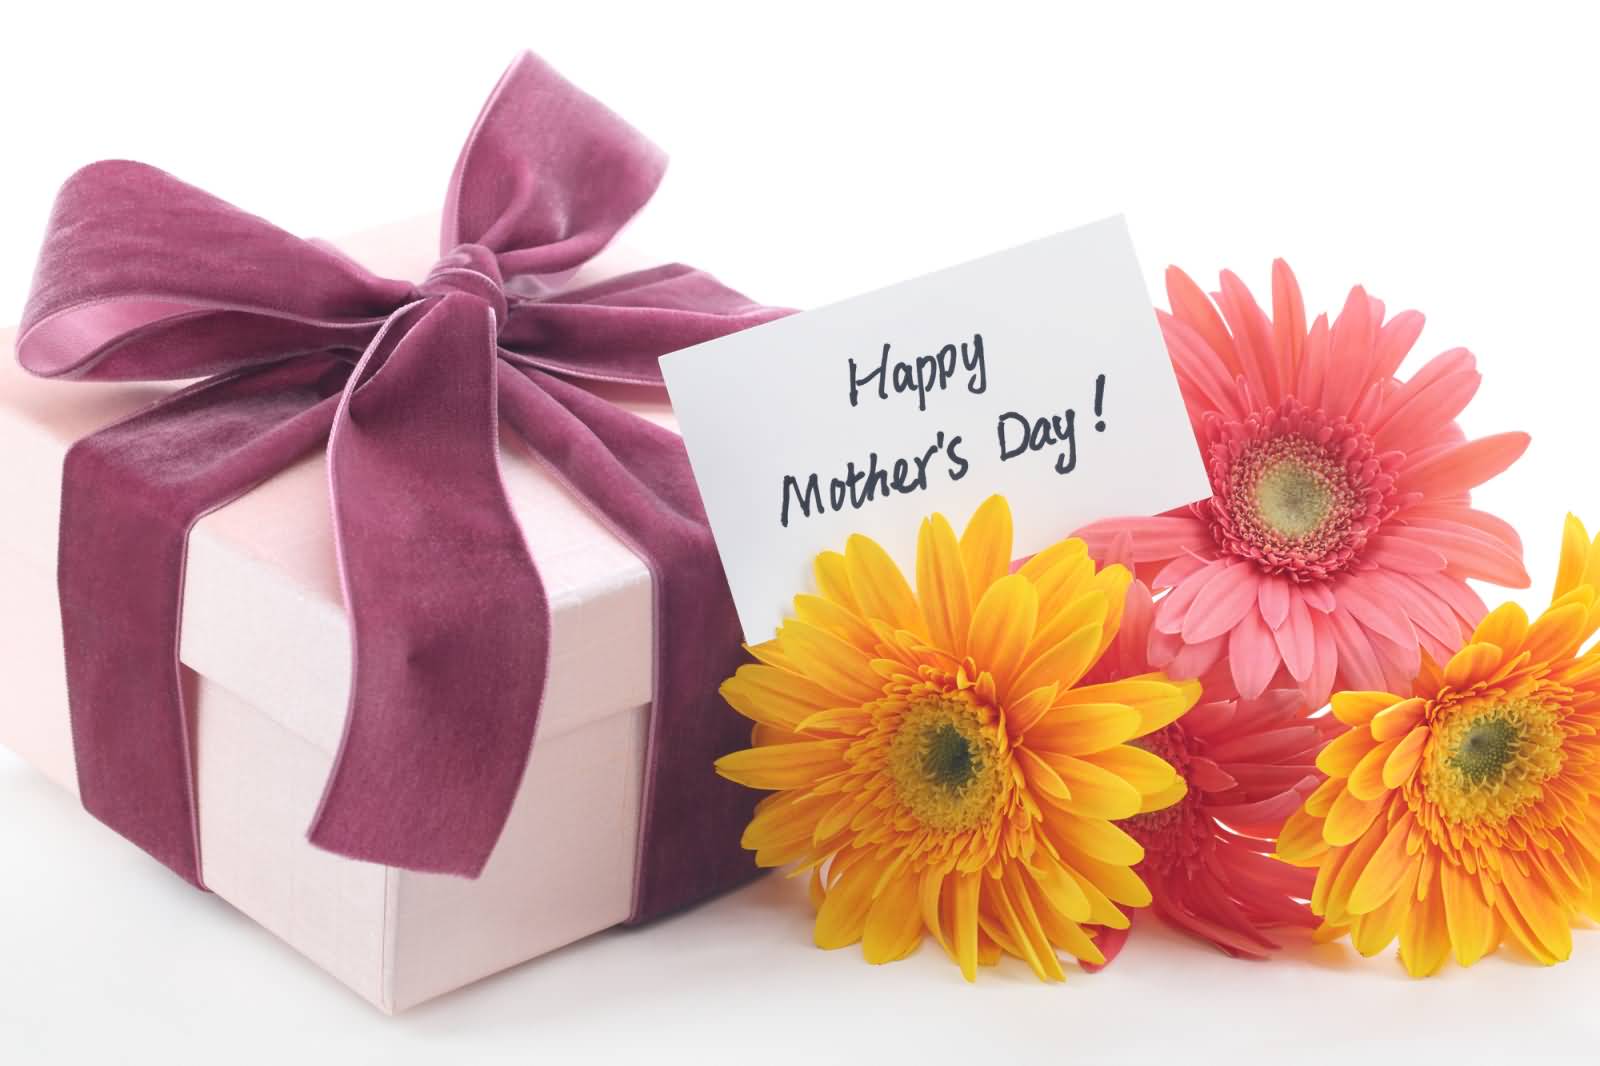 Happy Mother's Day Card With Gift Box And Flowers